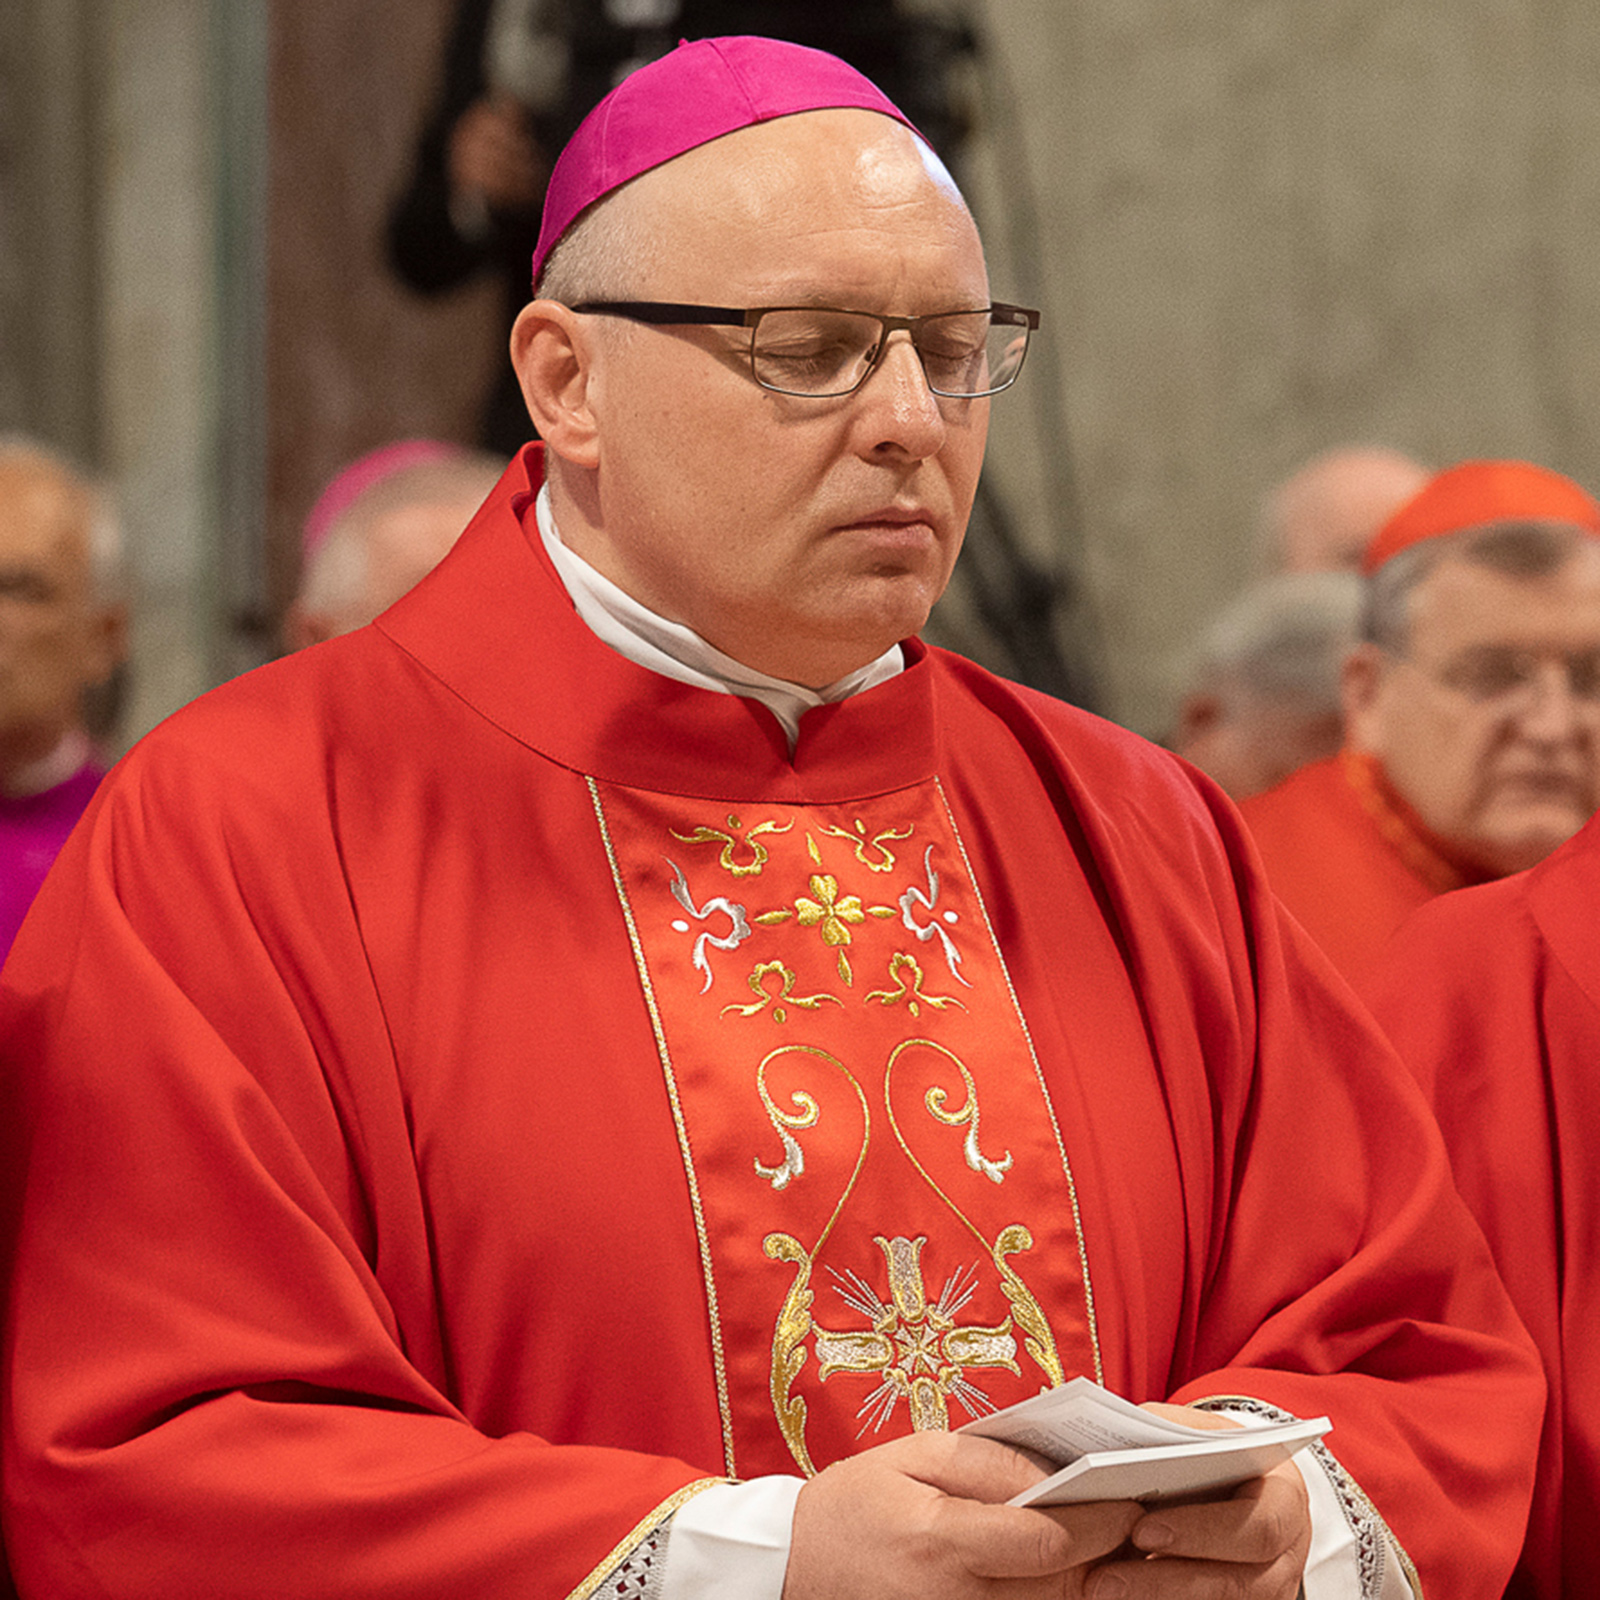 Archbishop of Southwark on why we pray for the Pope